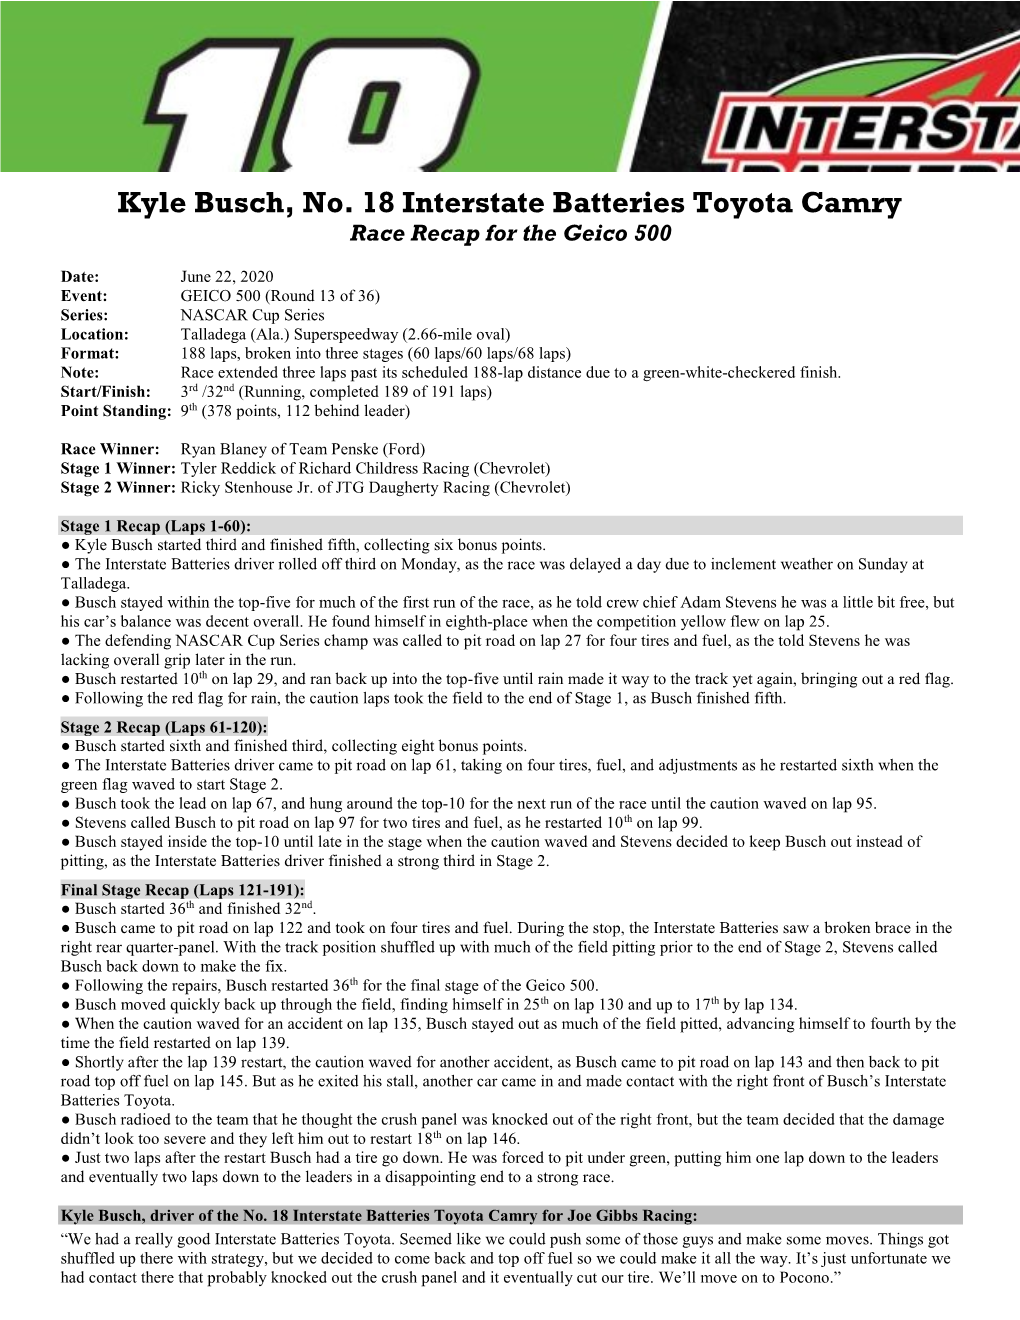 Kyle Busch, No. 18 Interstate Batteries Toyota Camry Race Recap for the Geico 500